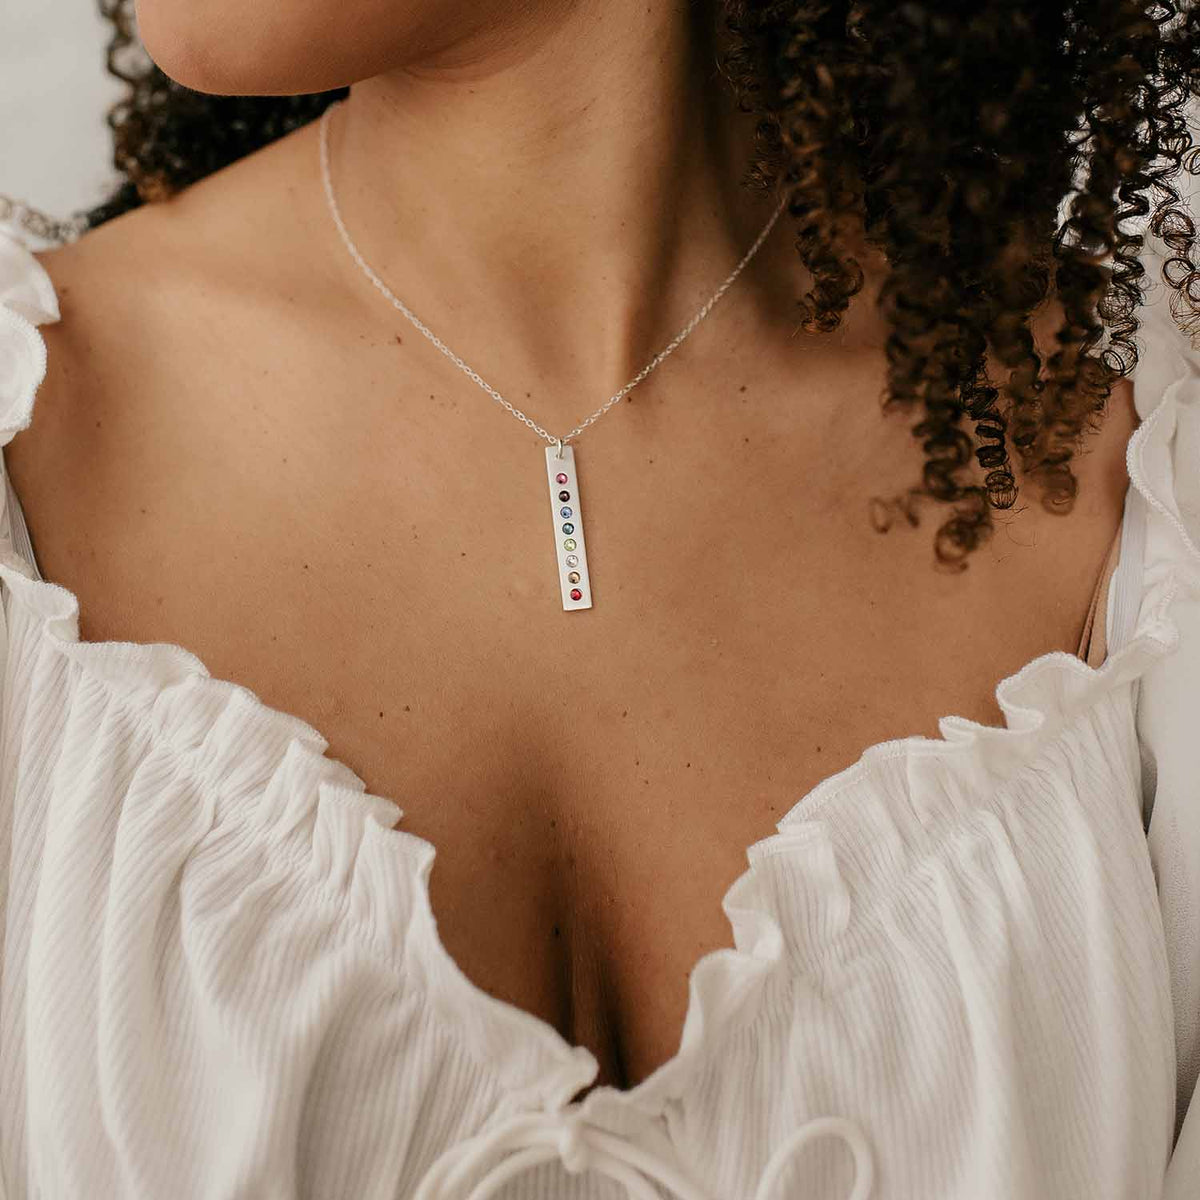 Vertical Bar Necklace with Birthstones - Love It Personalized